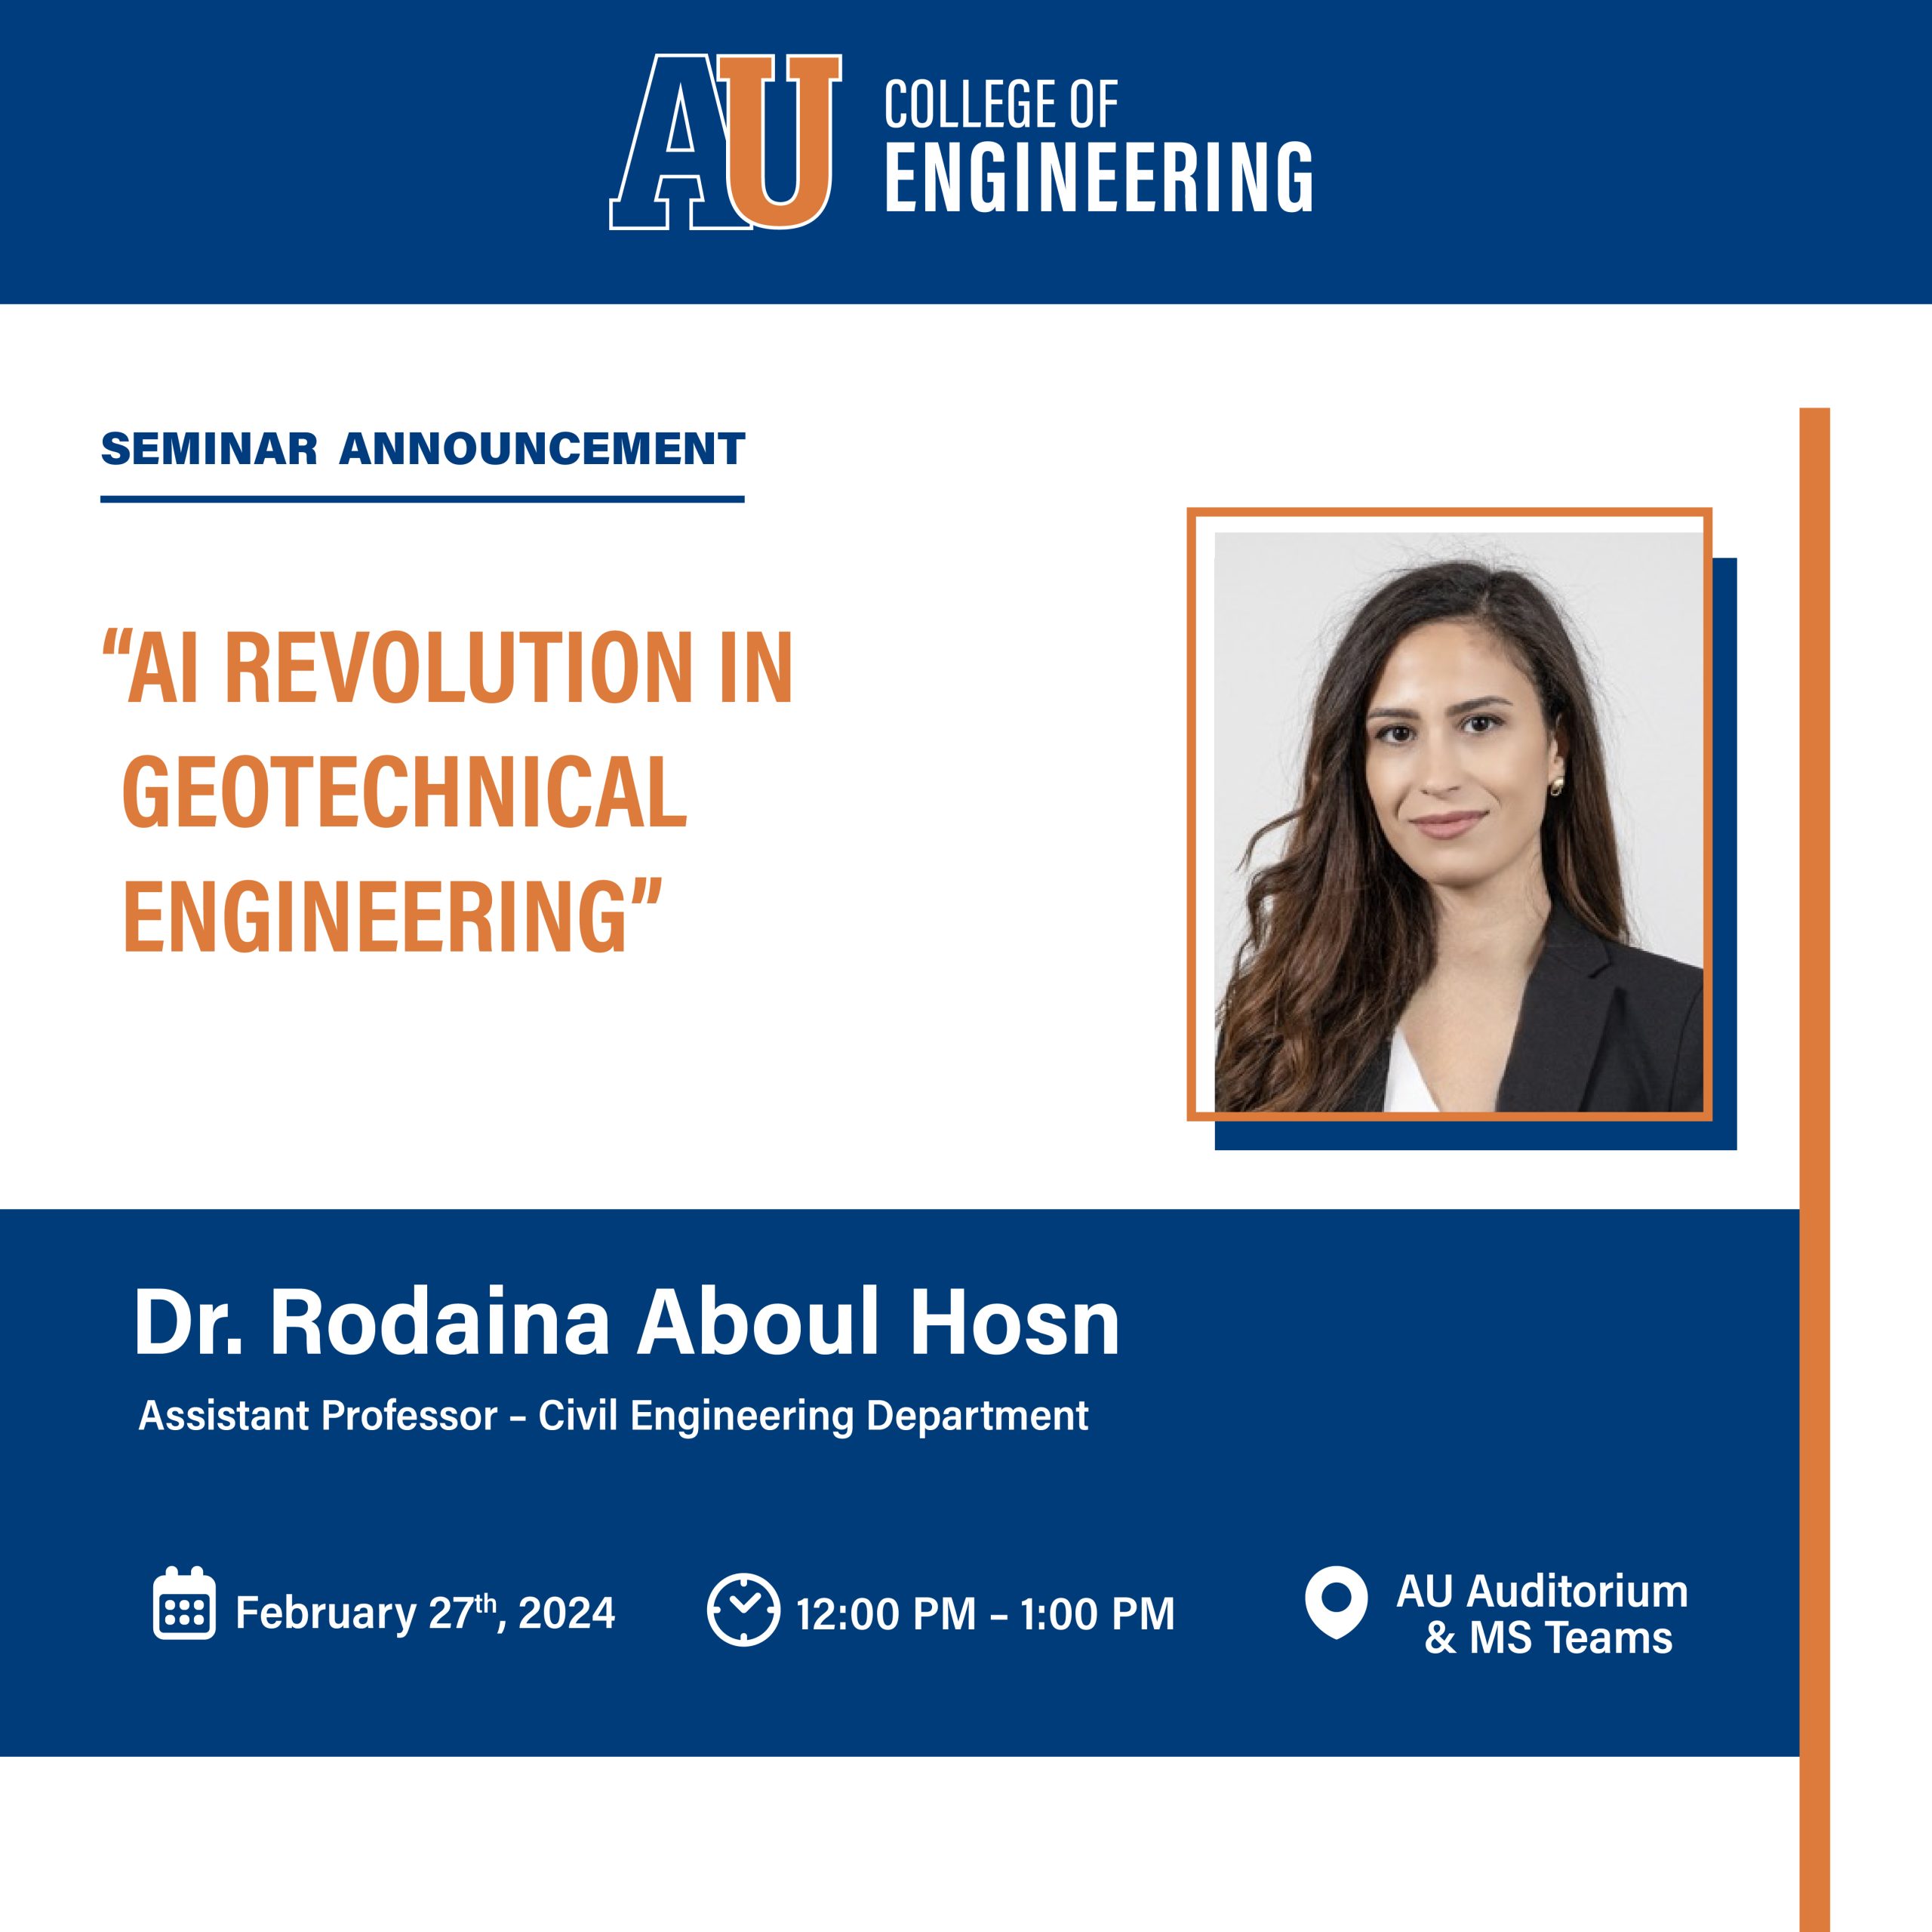 AI REVOLUTION IN GEOTECHNICAL ENGINEERING